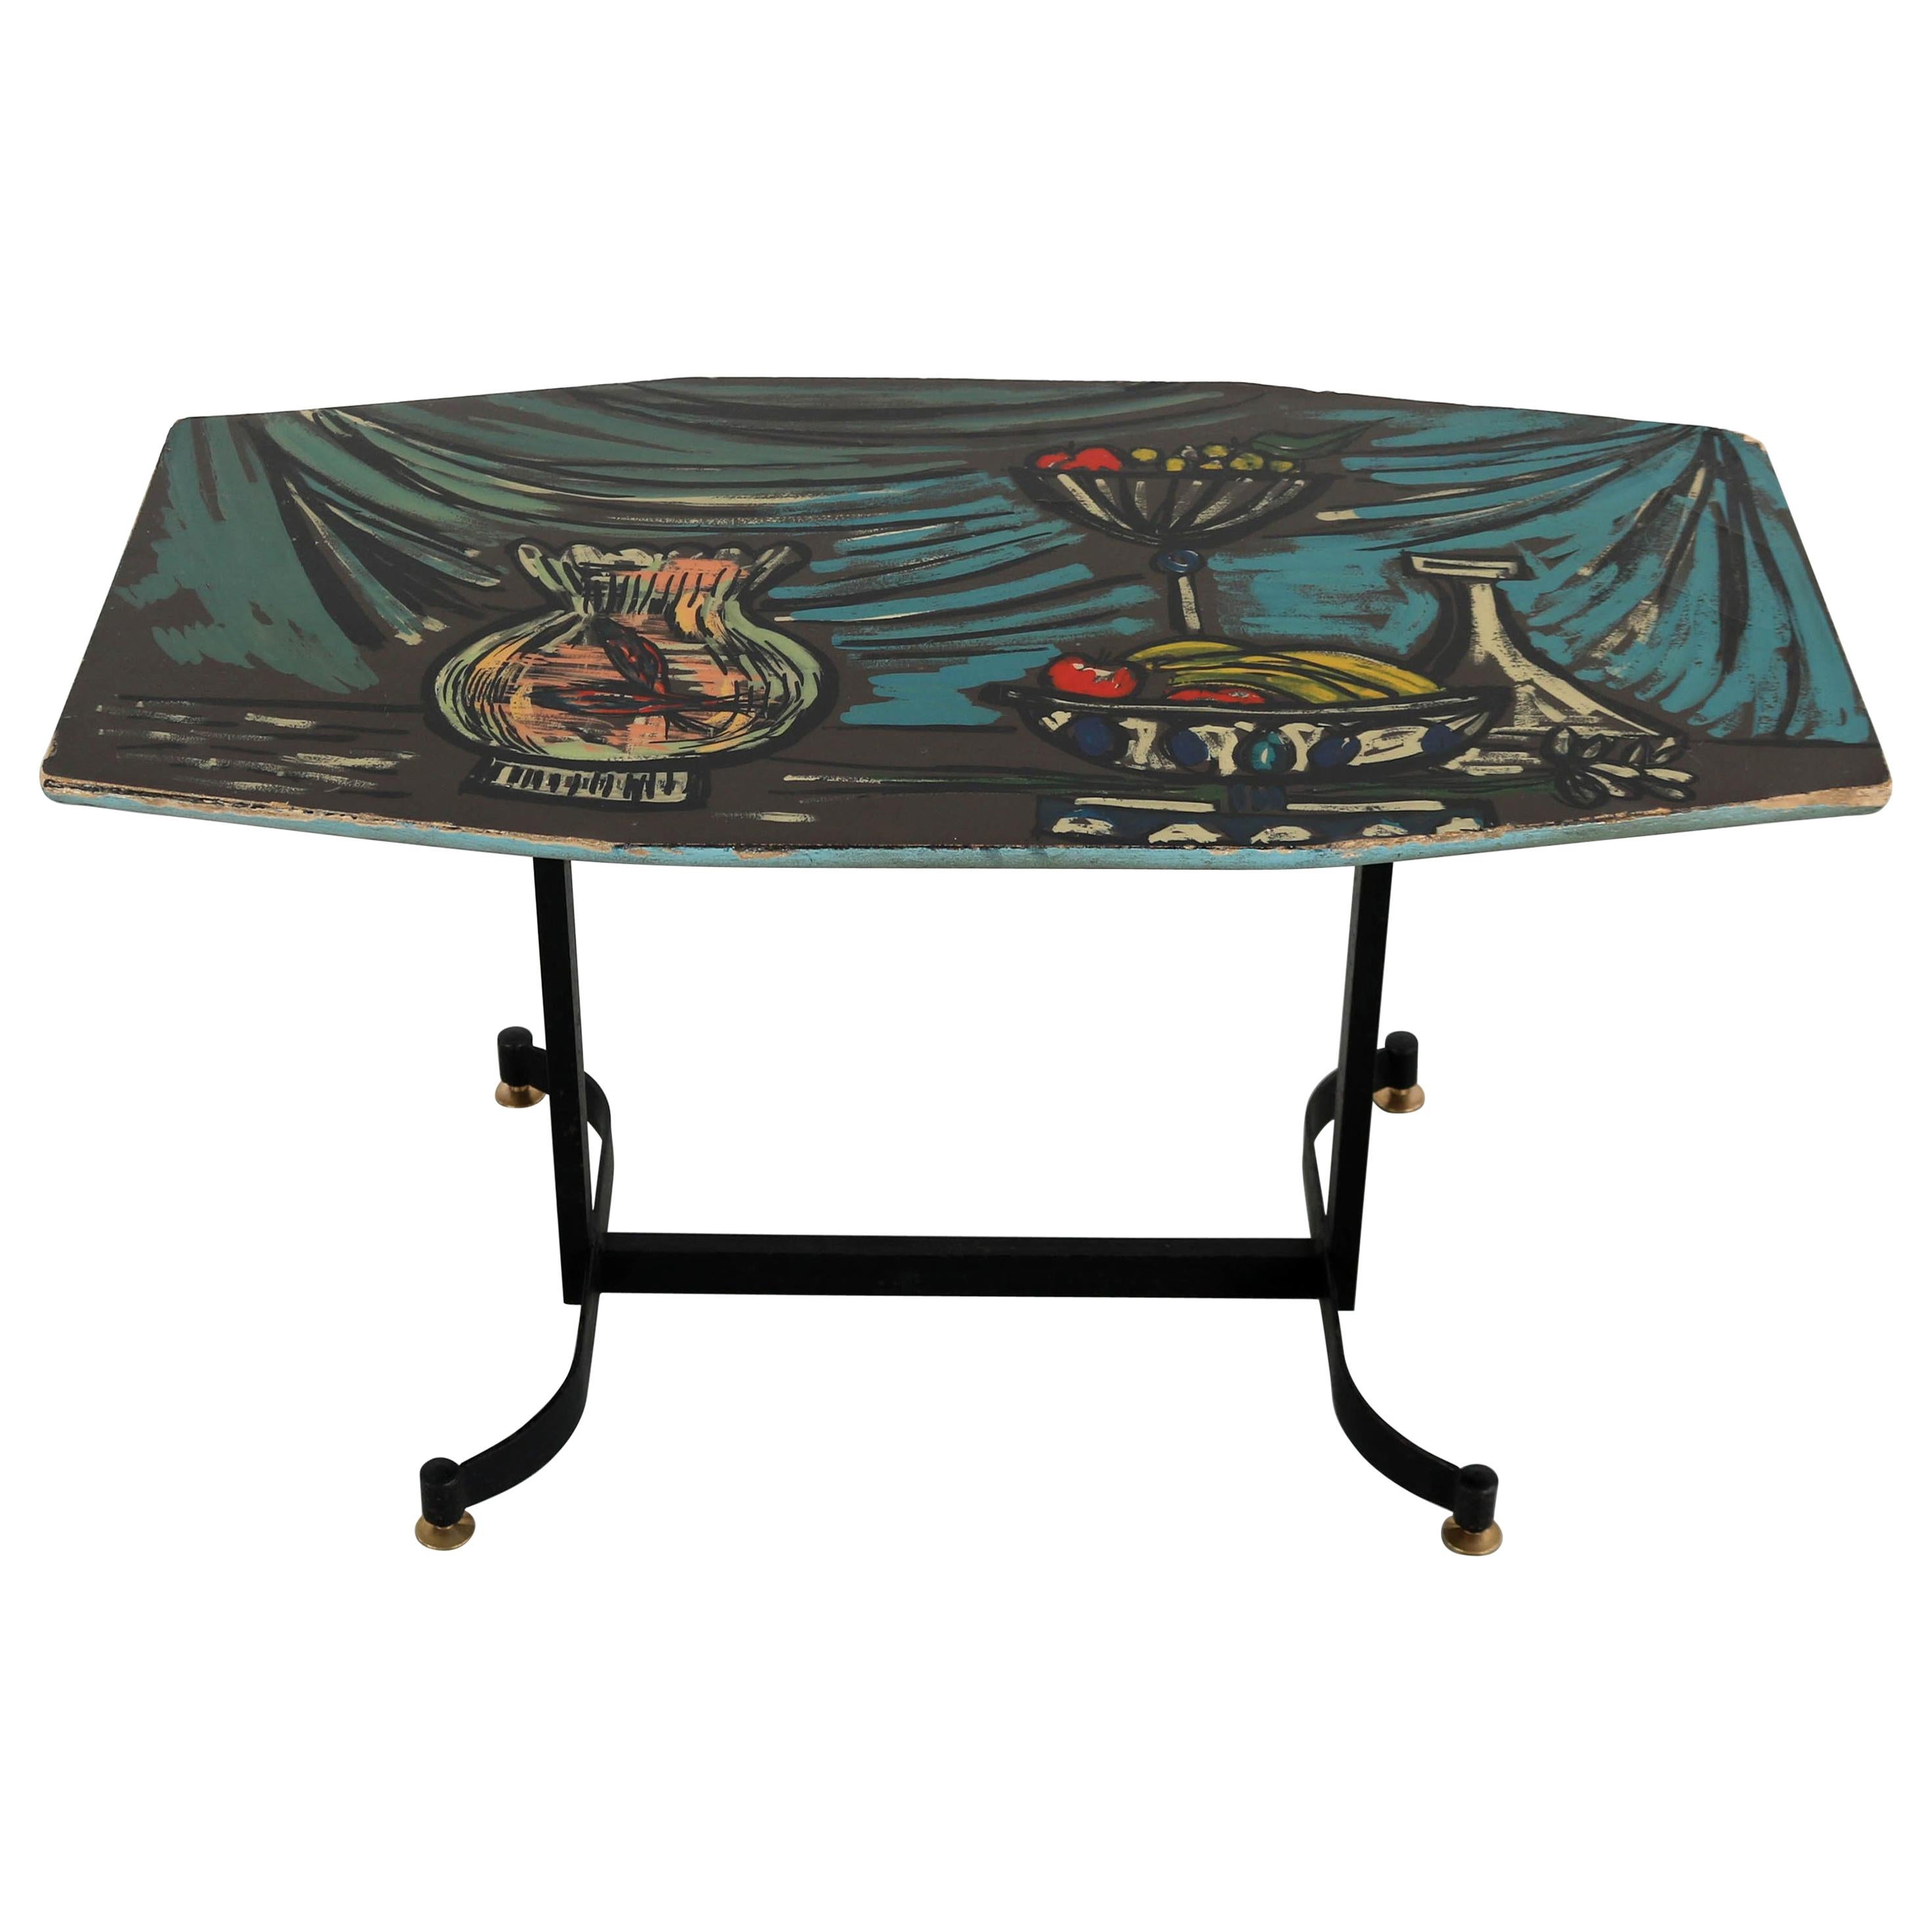 Italian Dark Sofa Table with Colorful Hand Painted Motives on Table Top, 1950s For Sale